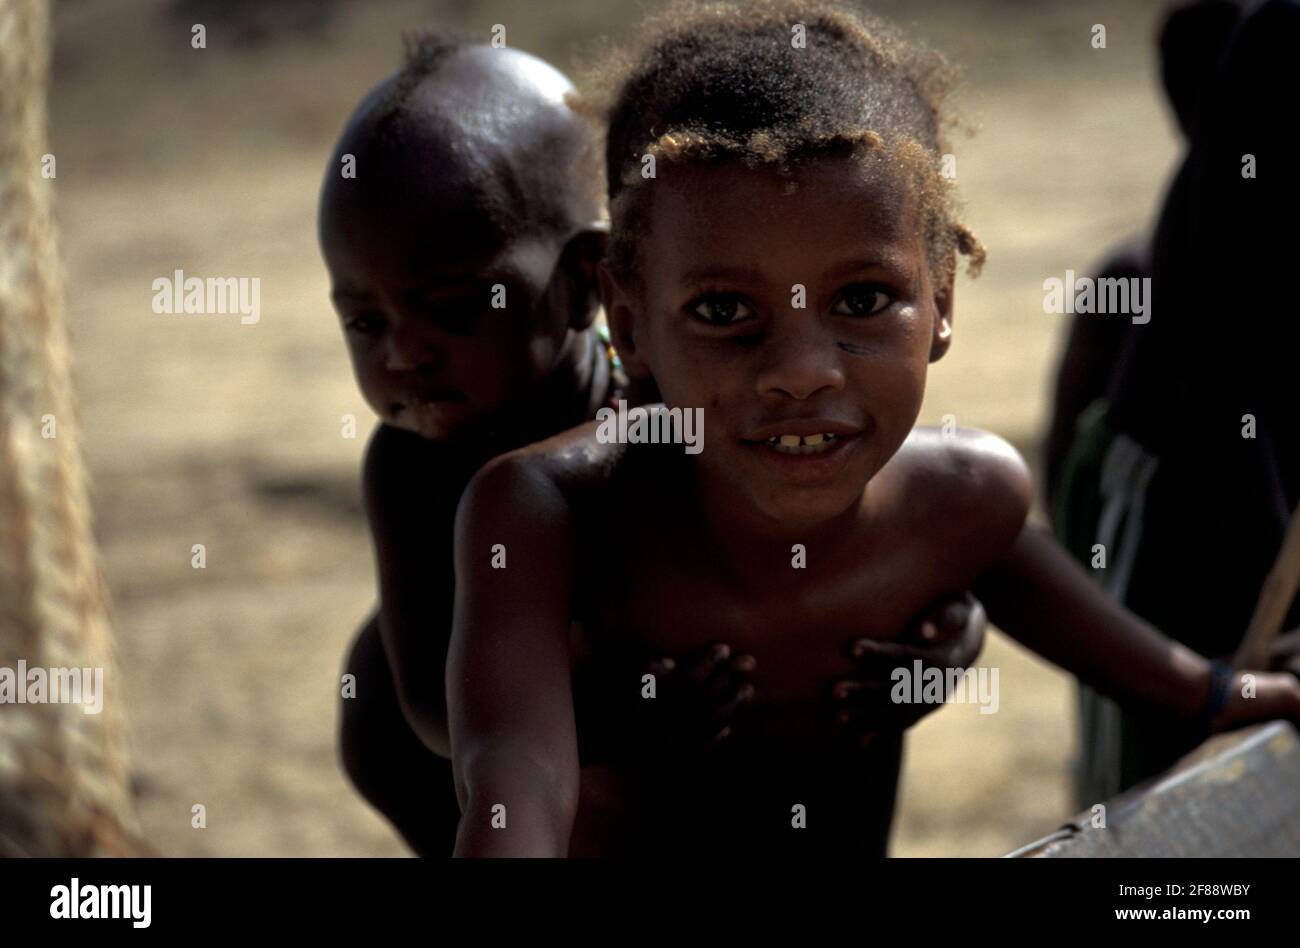 Girl carrying a baby in her back, Mopti, Inner Niger Delta region, Mali Stock Photo